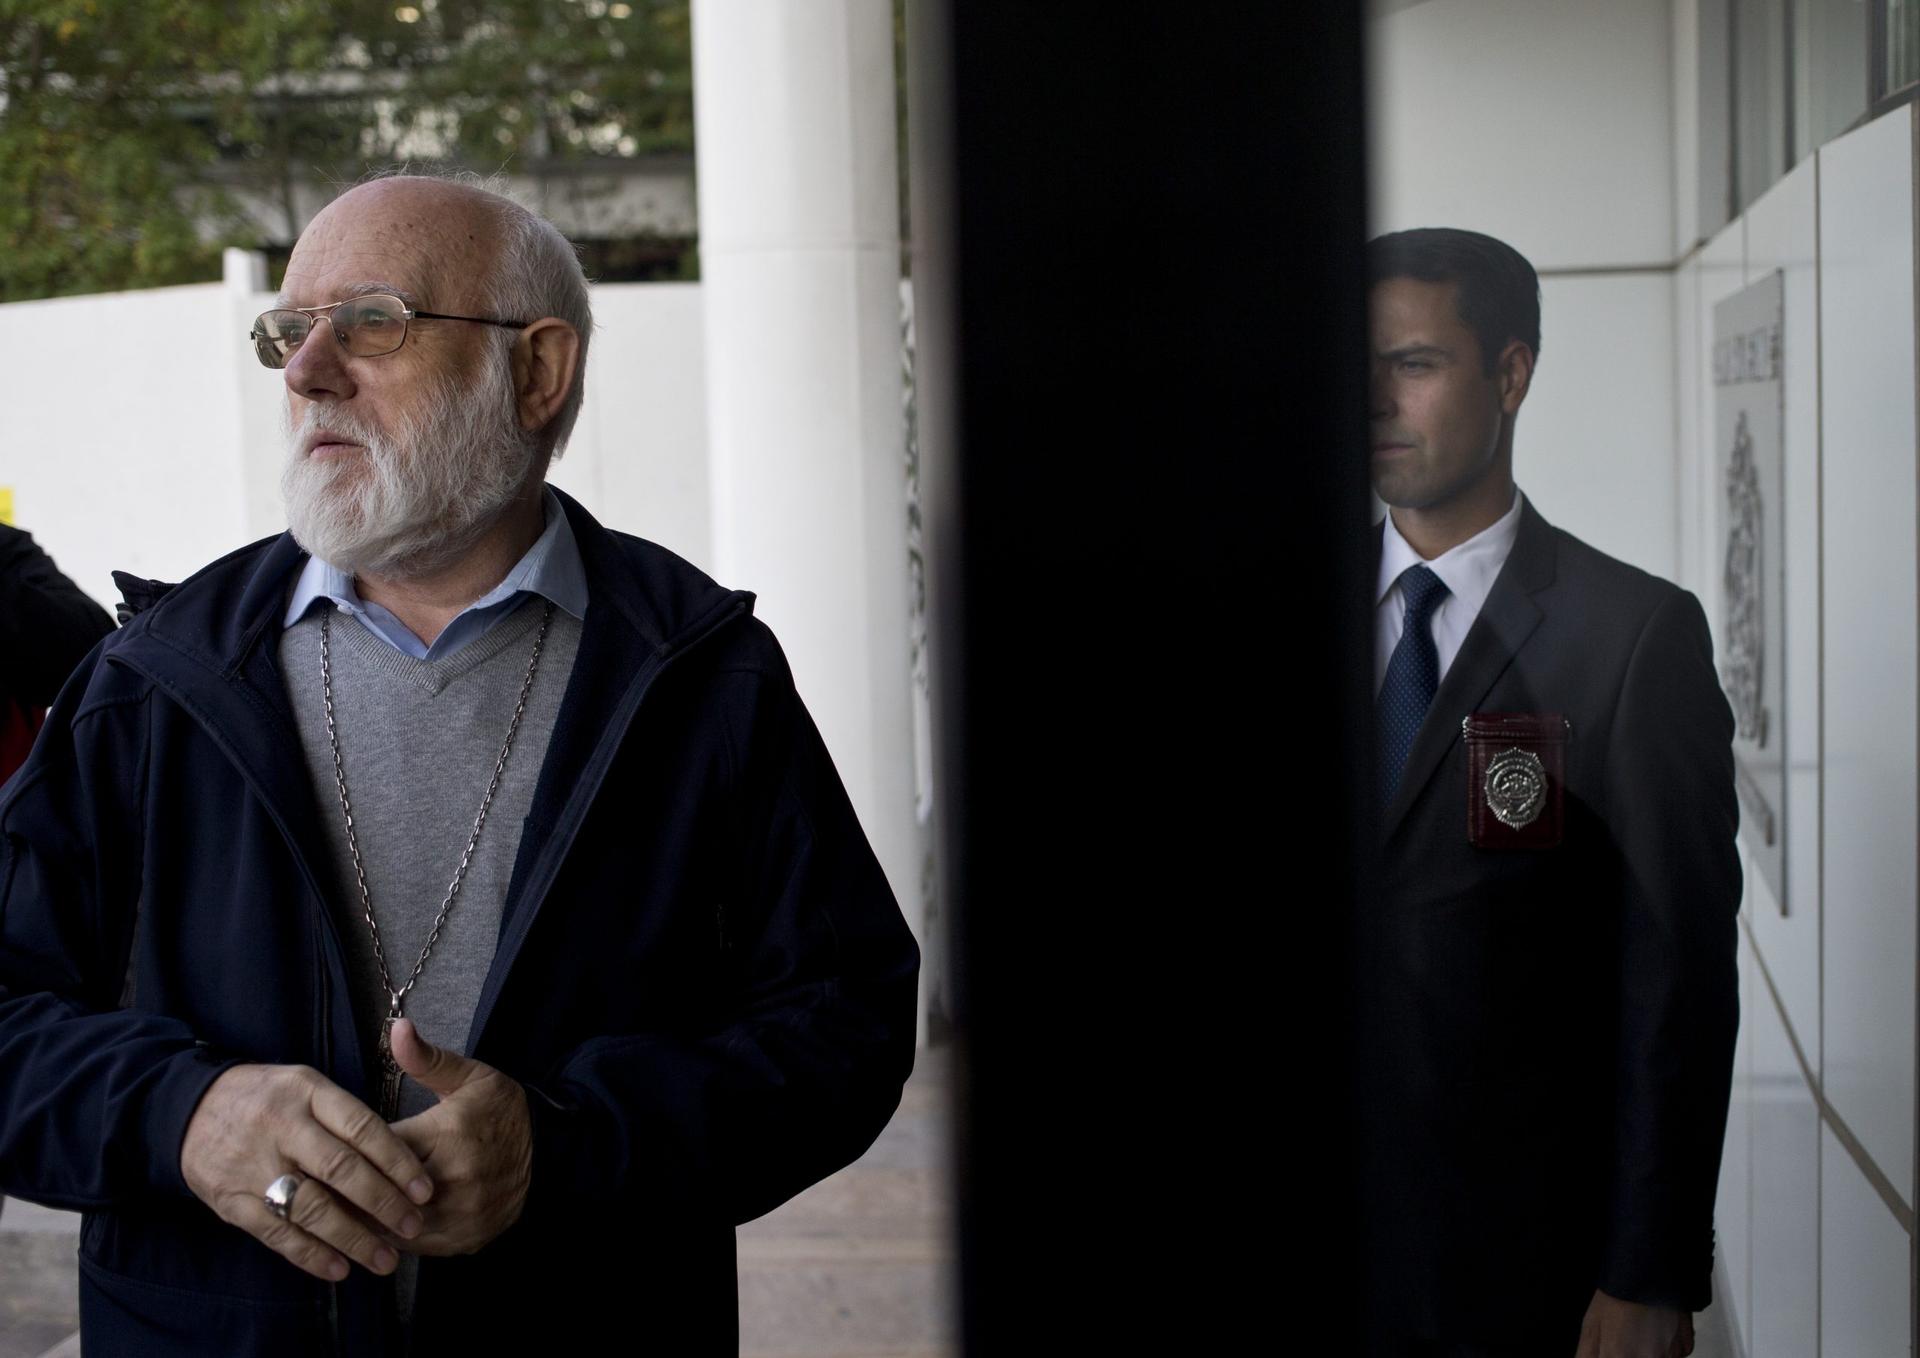 Meet the Chile prelate who may just have the Church’s toughest job